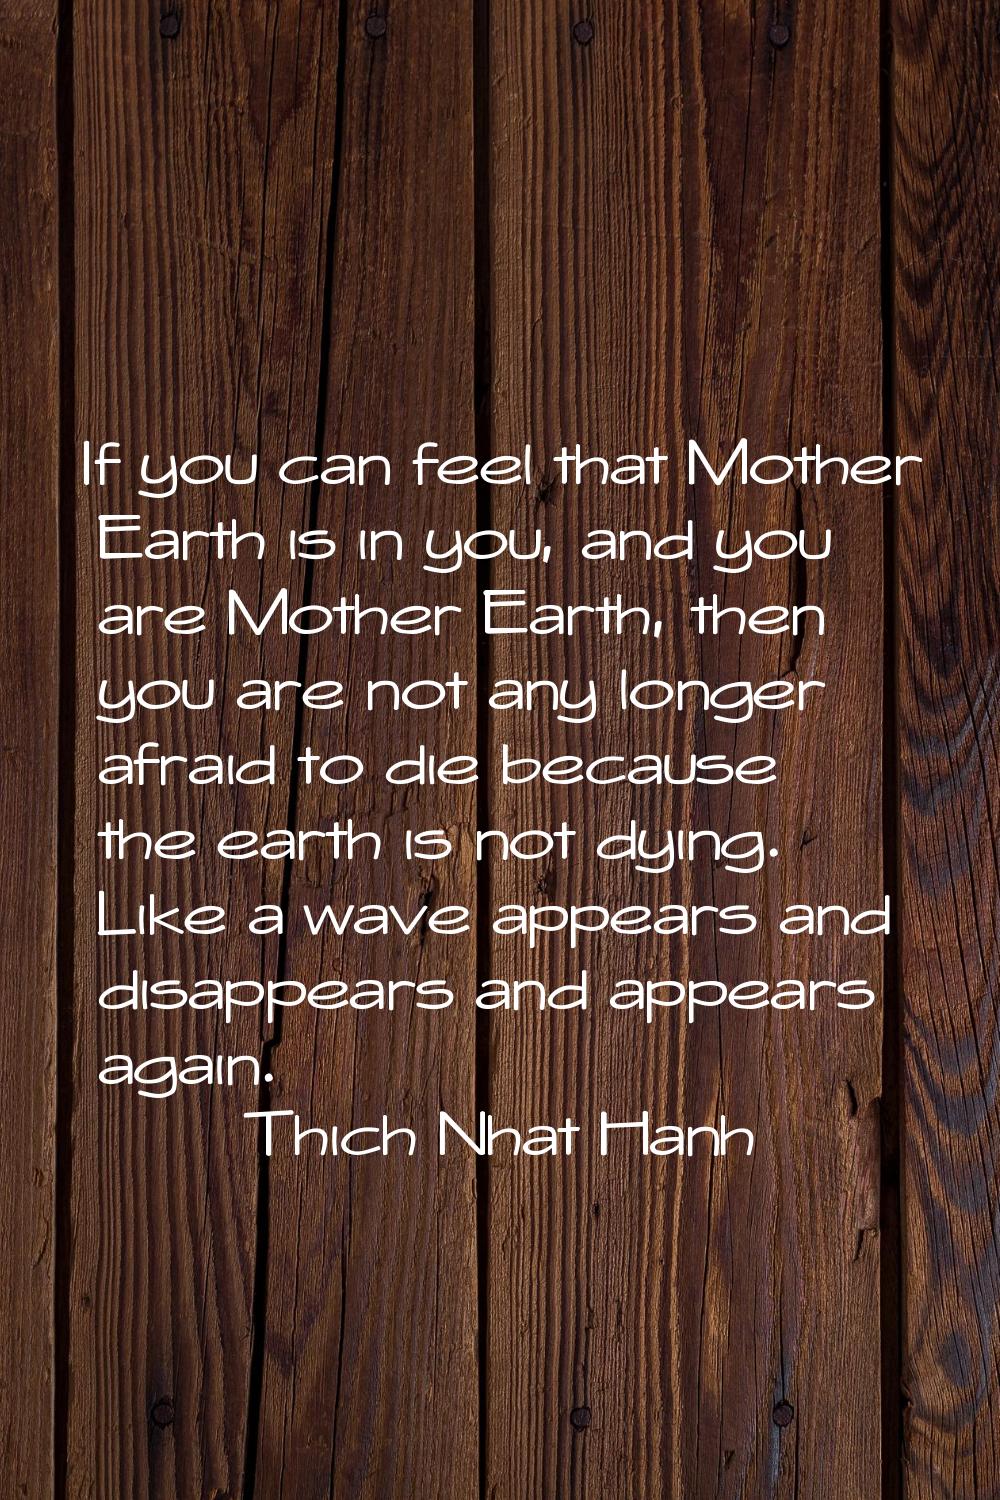 If you can feel that Mother Earth is in you, and you are Mother Earth, then you are not any longer 